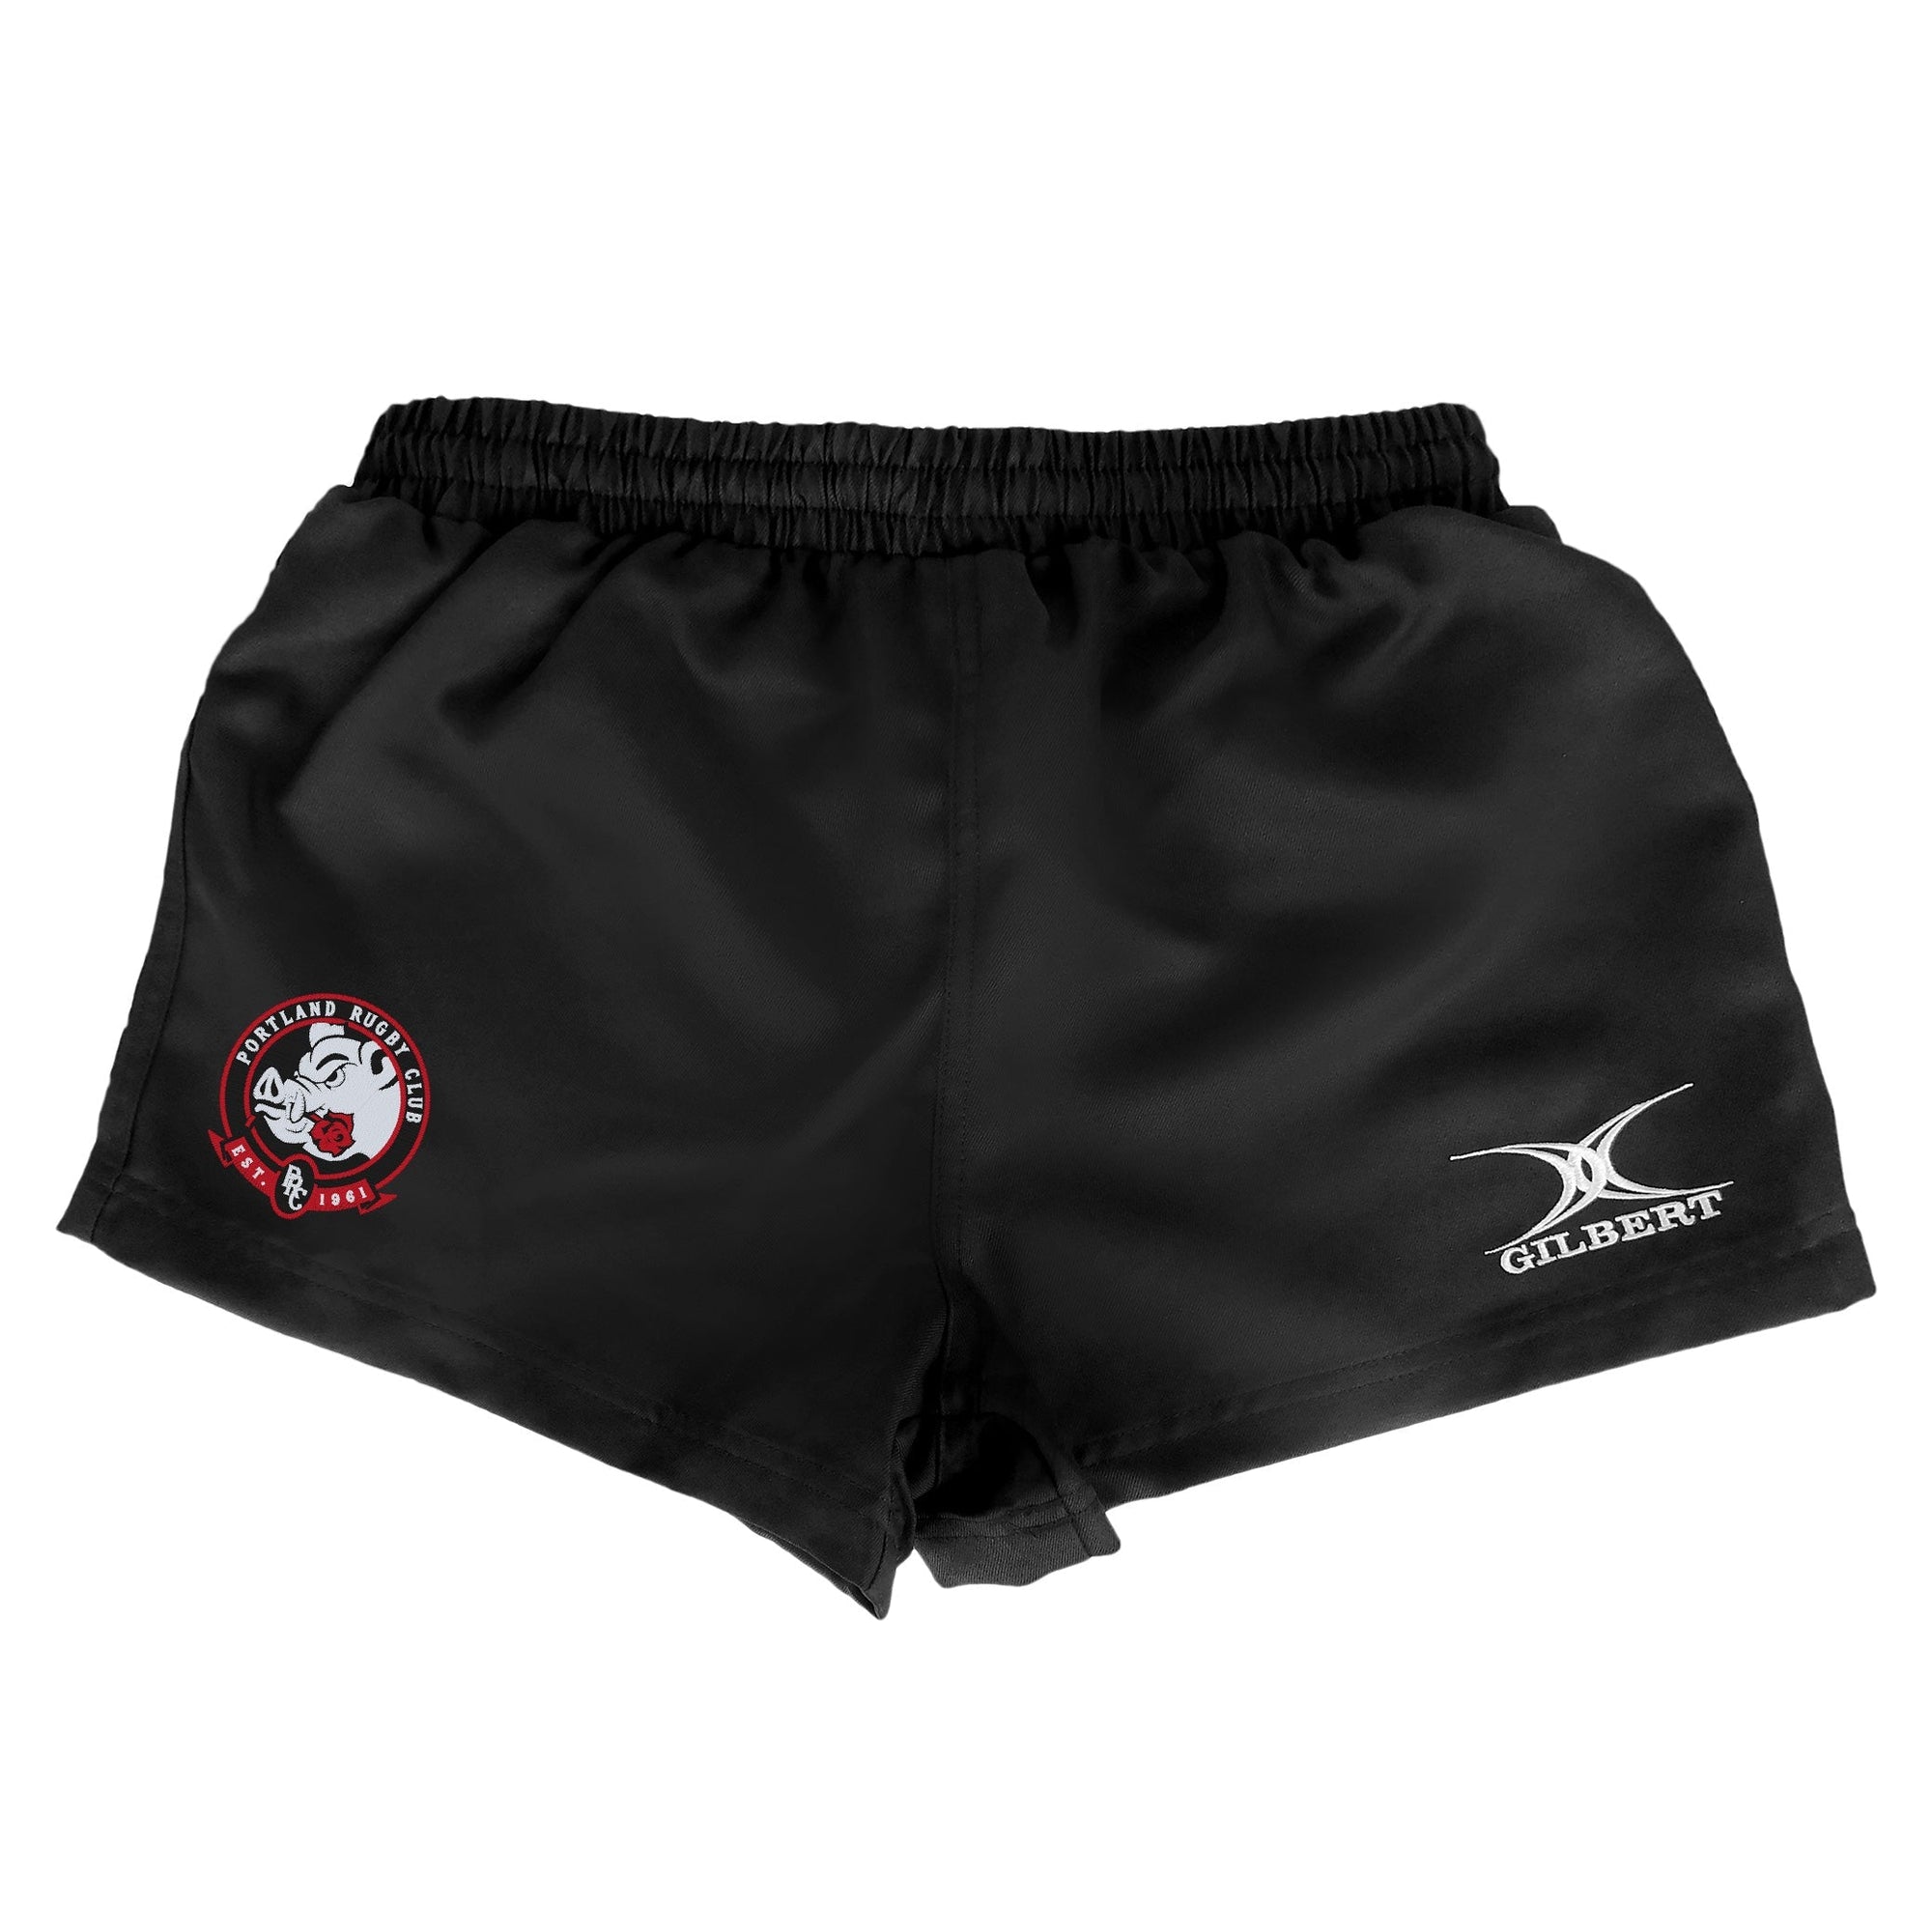 Rugby Imports Portland Pigs Saracen Rugby Shorts